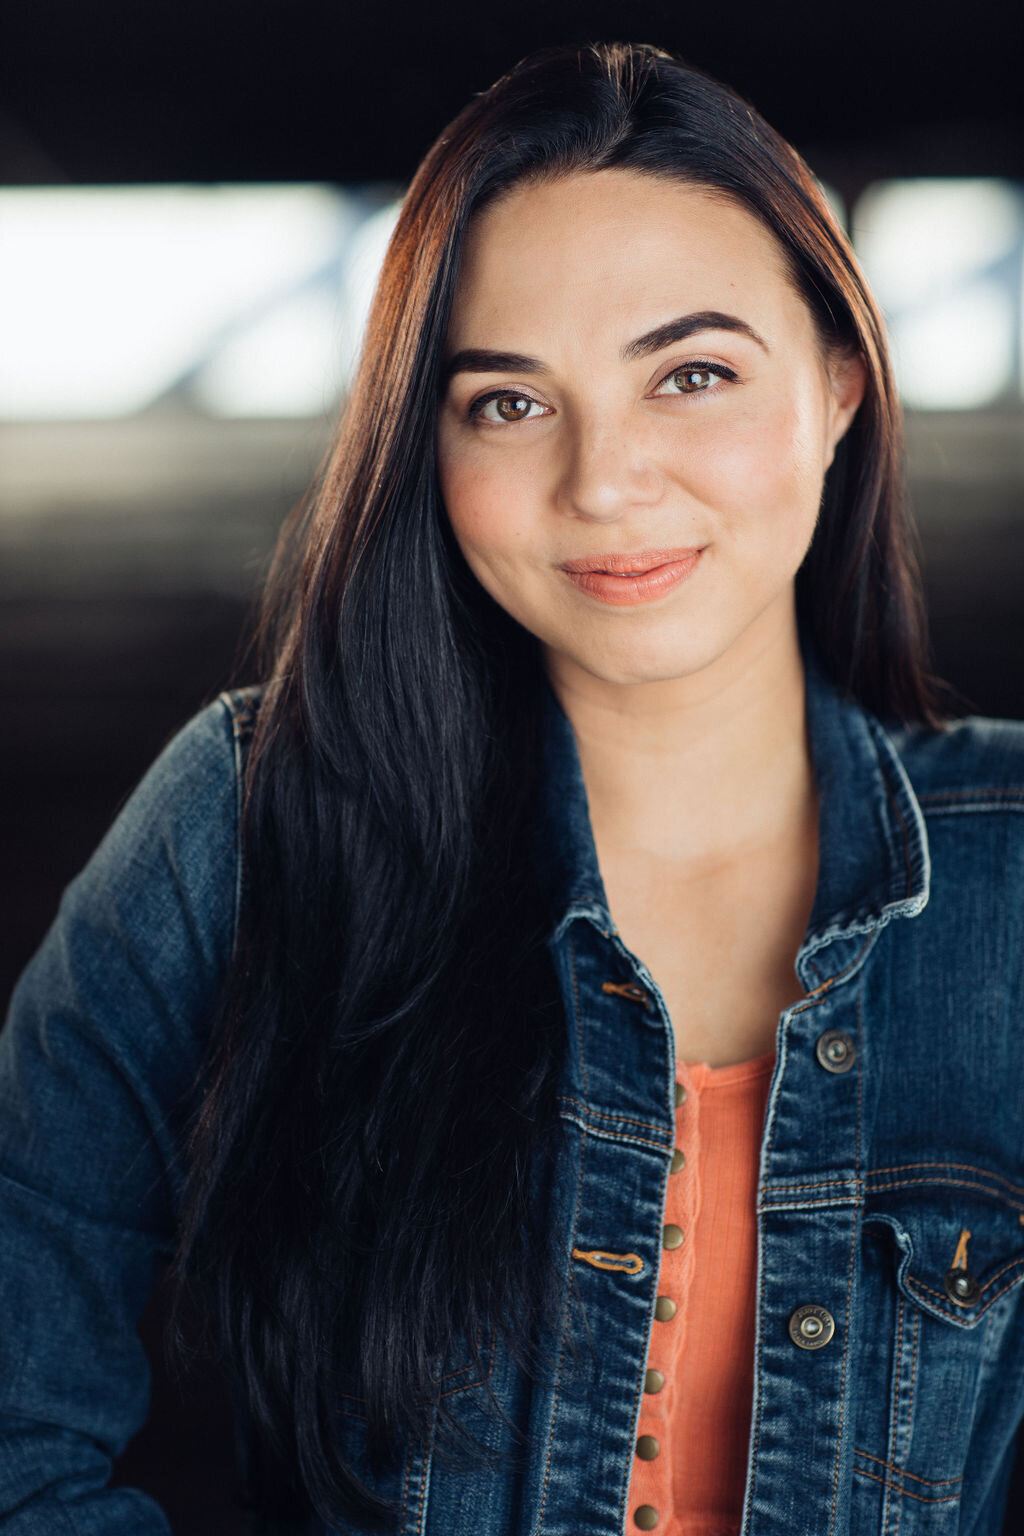 Headshot Photograph Of Young Woman In Outer Dark Blue Denim Jacket And Inner Orange Buttoned Blouse Los Angeles